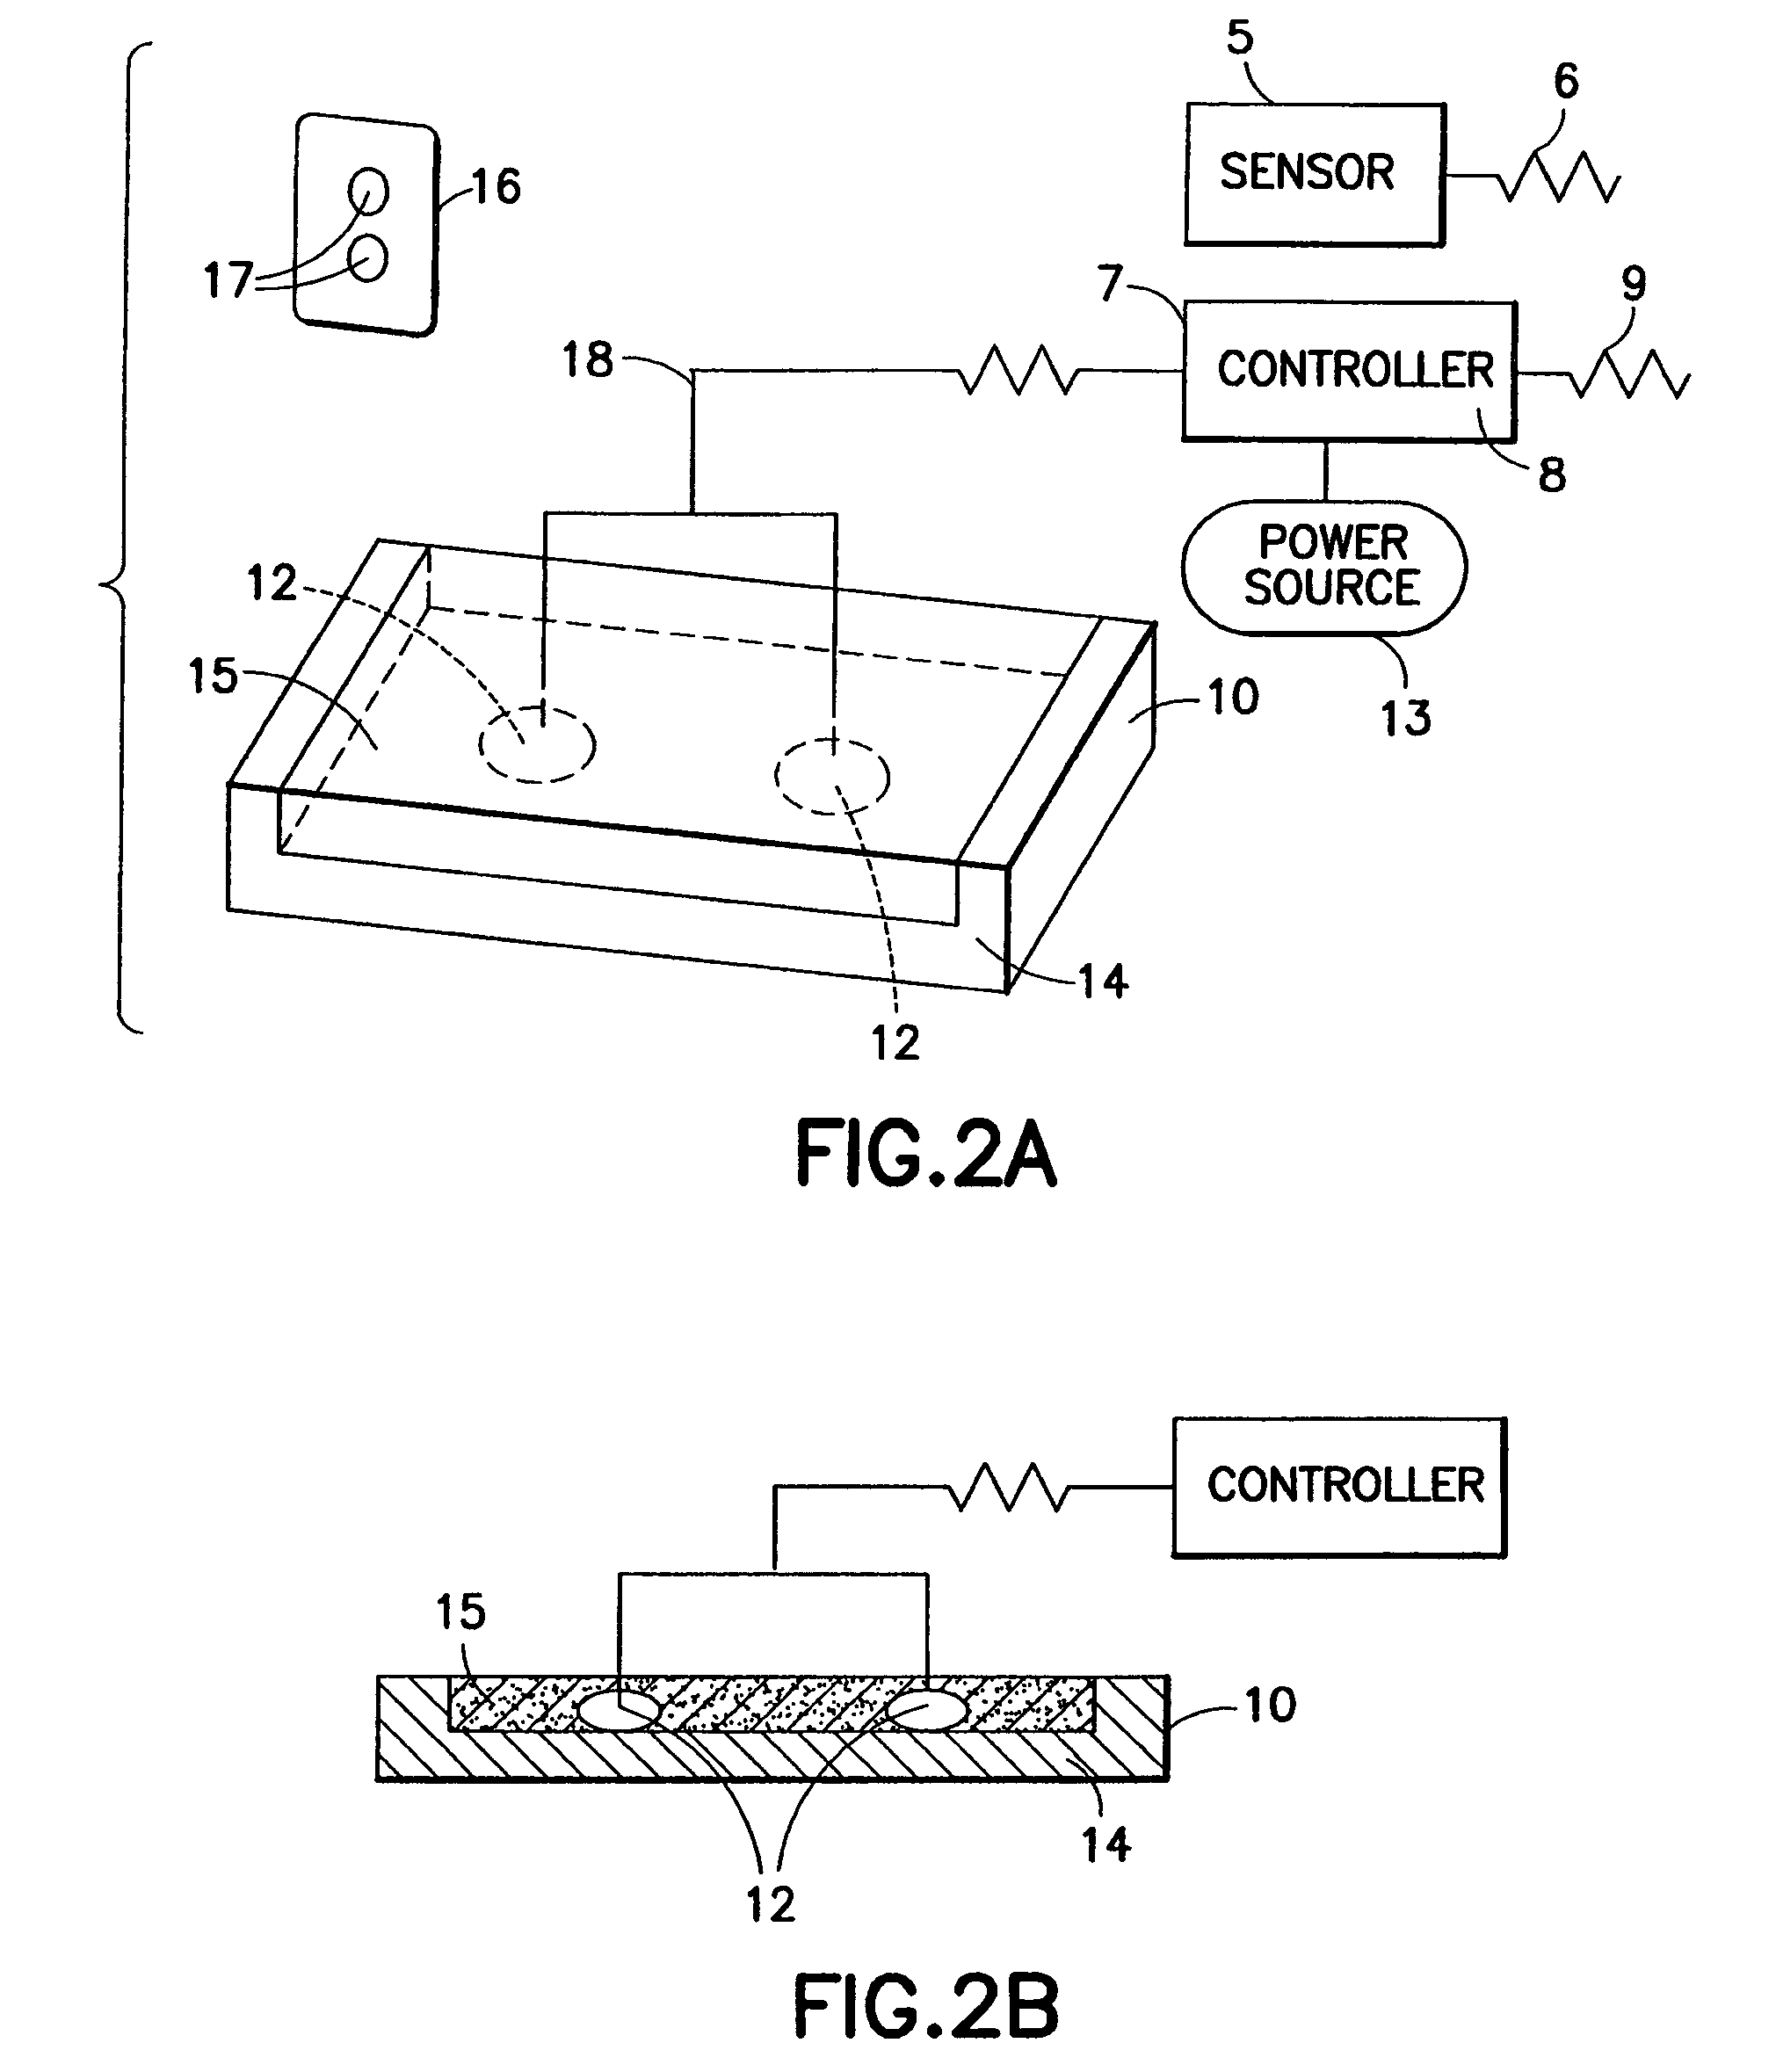 Apparatus and method for selectively transmitting vibrations to an individual situated on a support surface